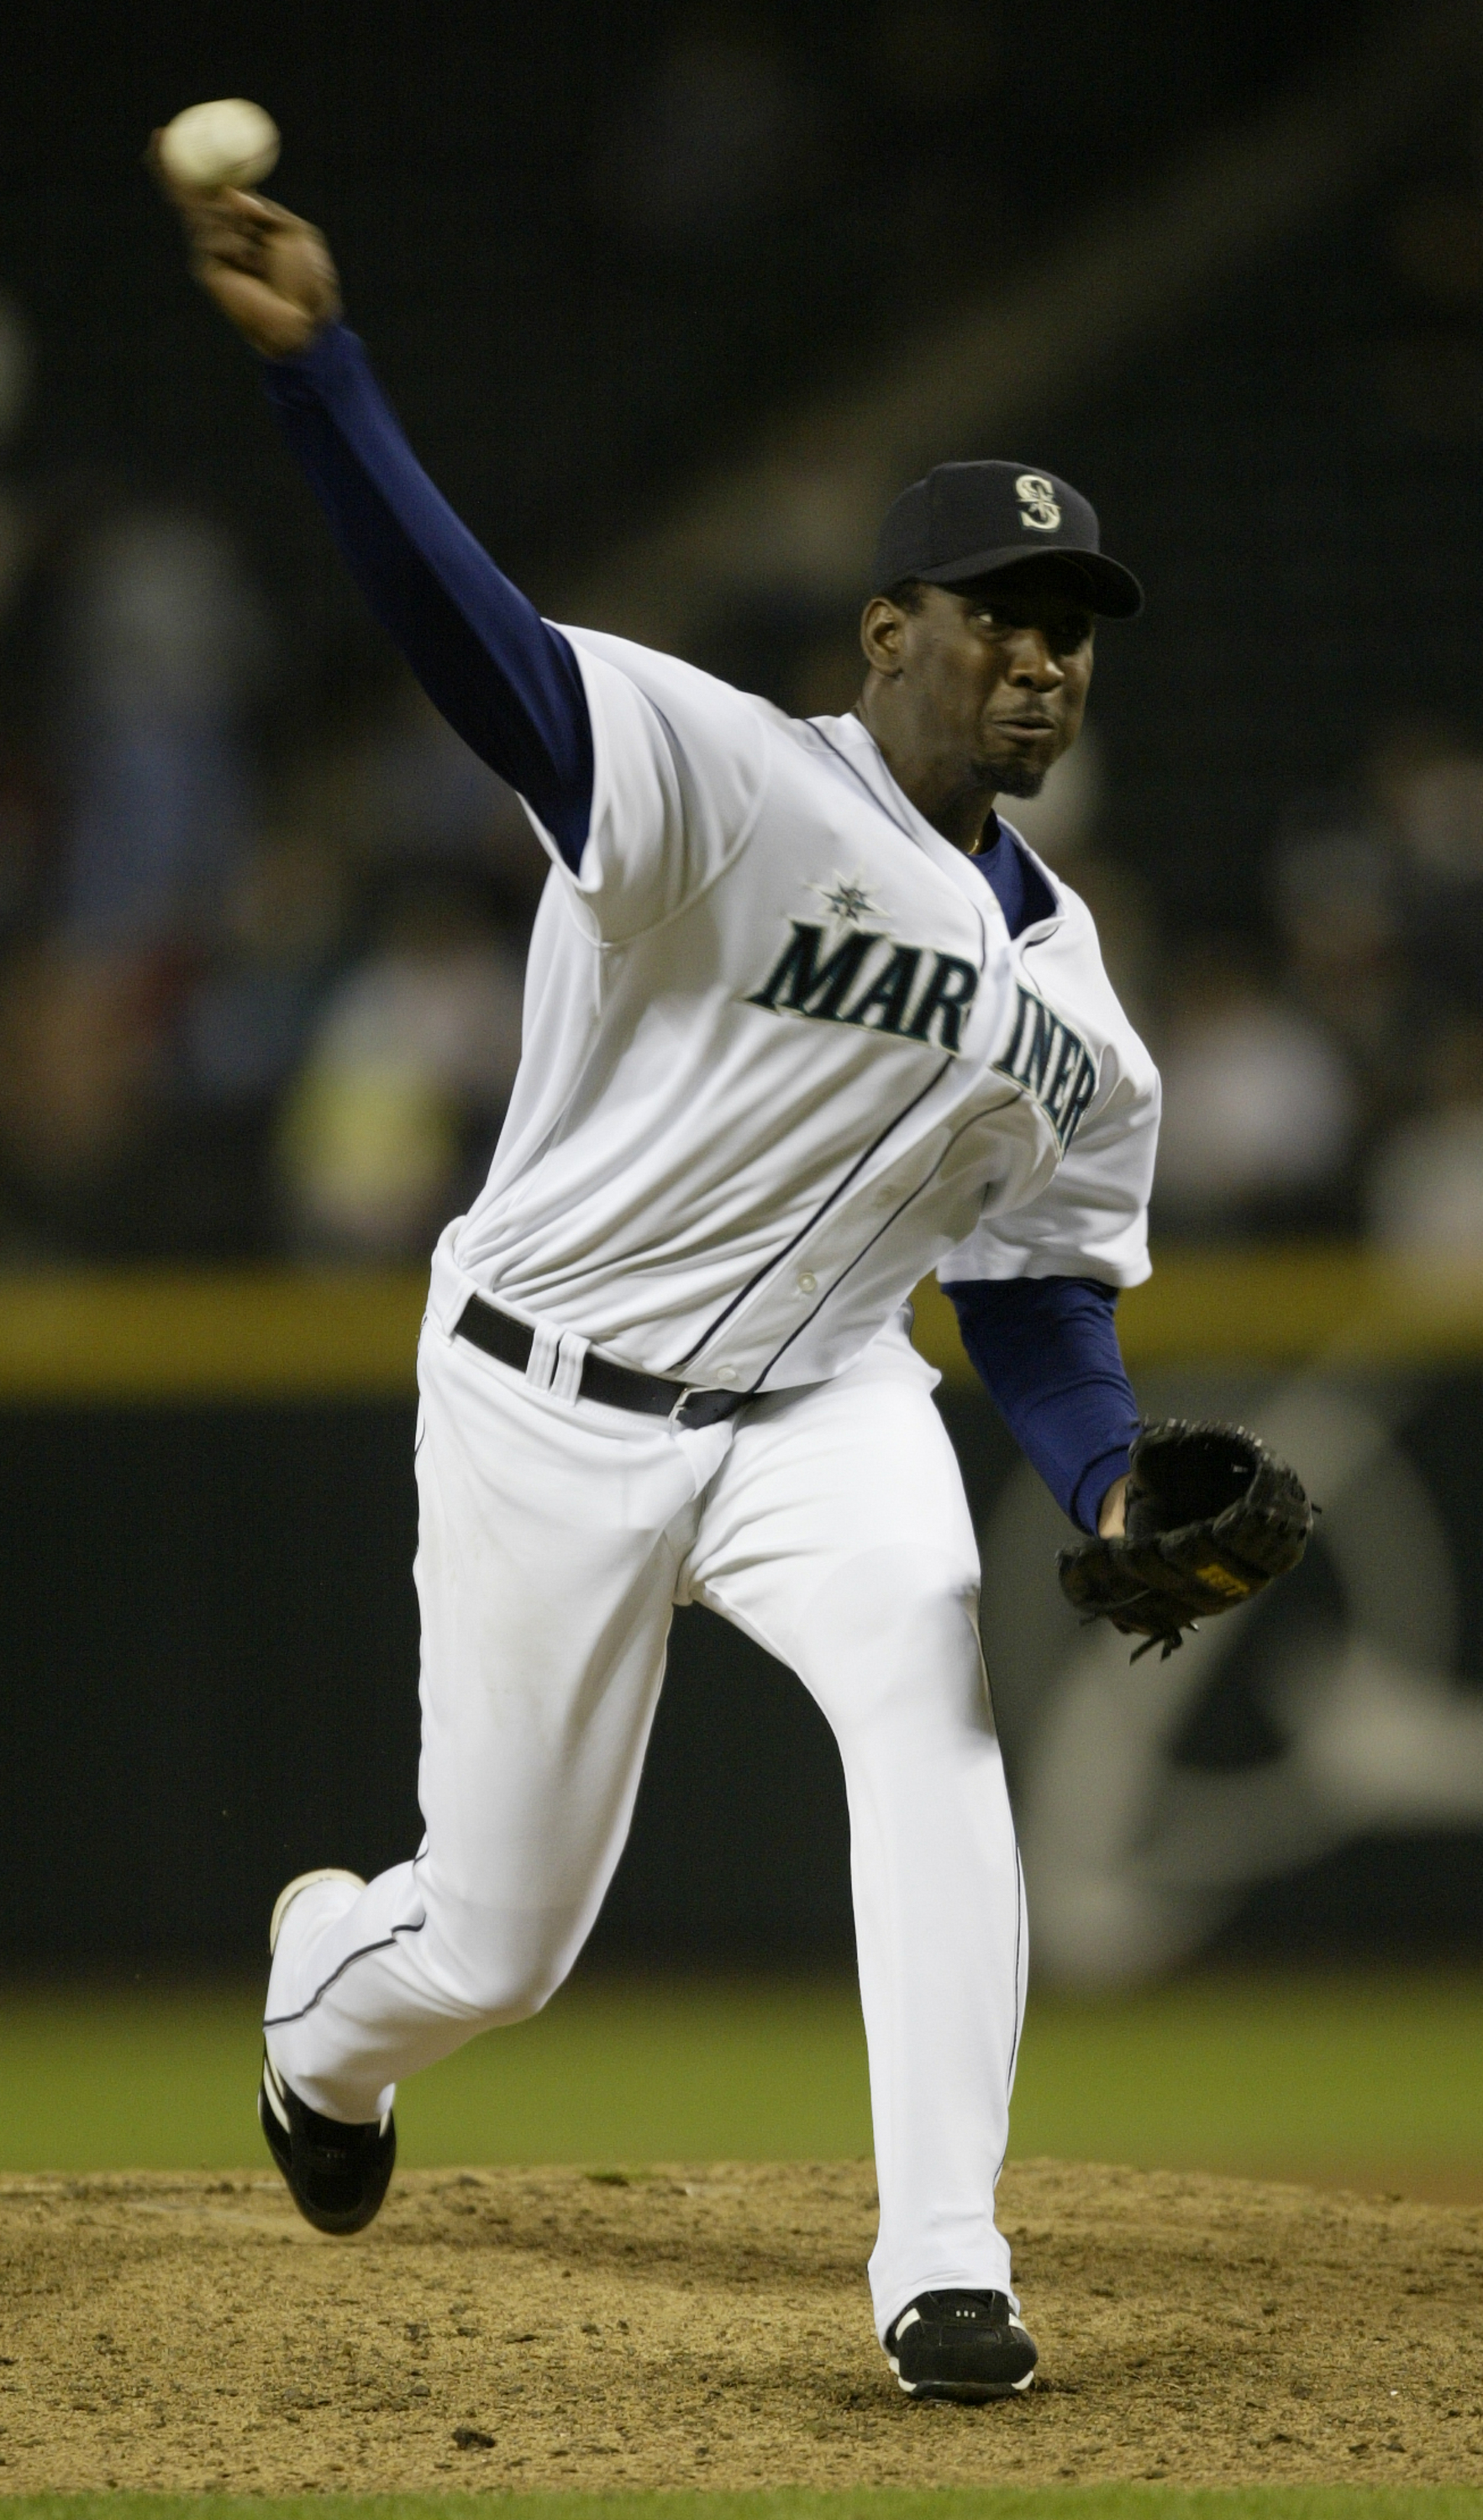 SEATTLE - SEPTEMBER 29:  Rafael Soriano #39 of the Seattle Mariners pitches against the Texas Rangers on September 29, 2005 at Safeco Field in Seattle, Washington.  (Photo by Otto Greule Jr/Getty Images)